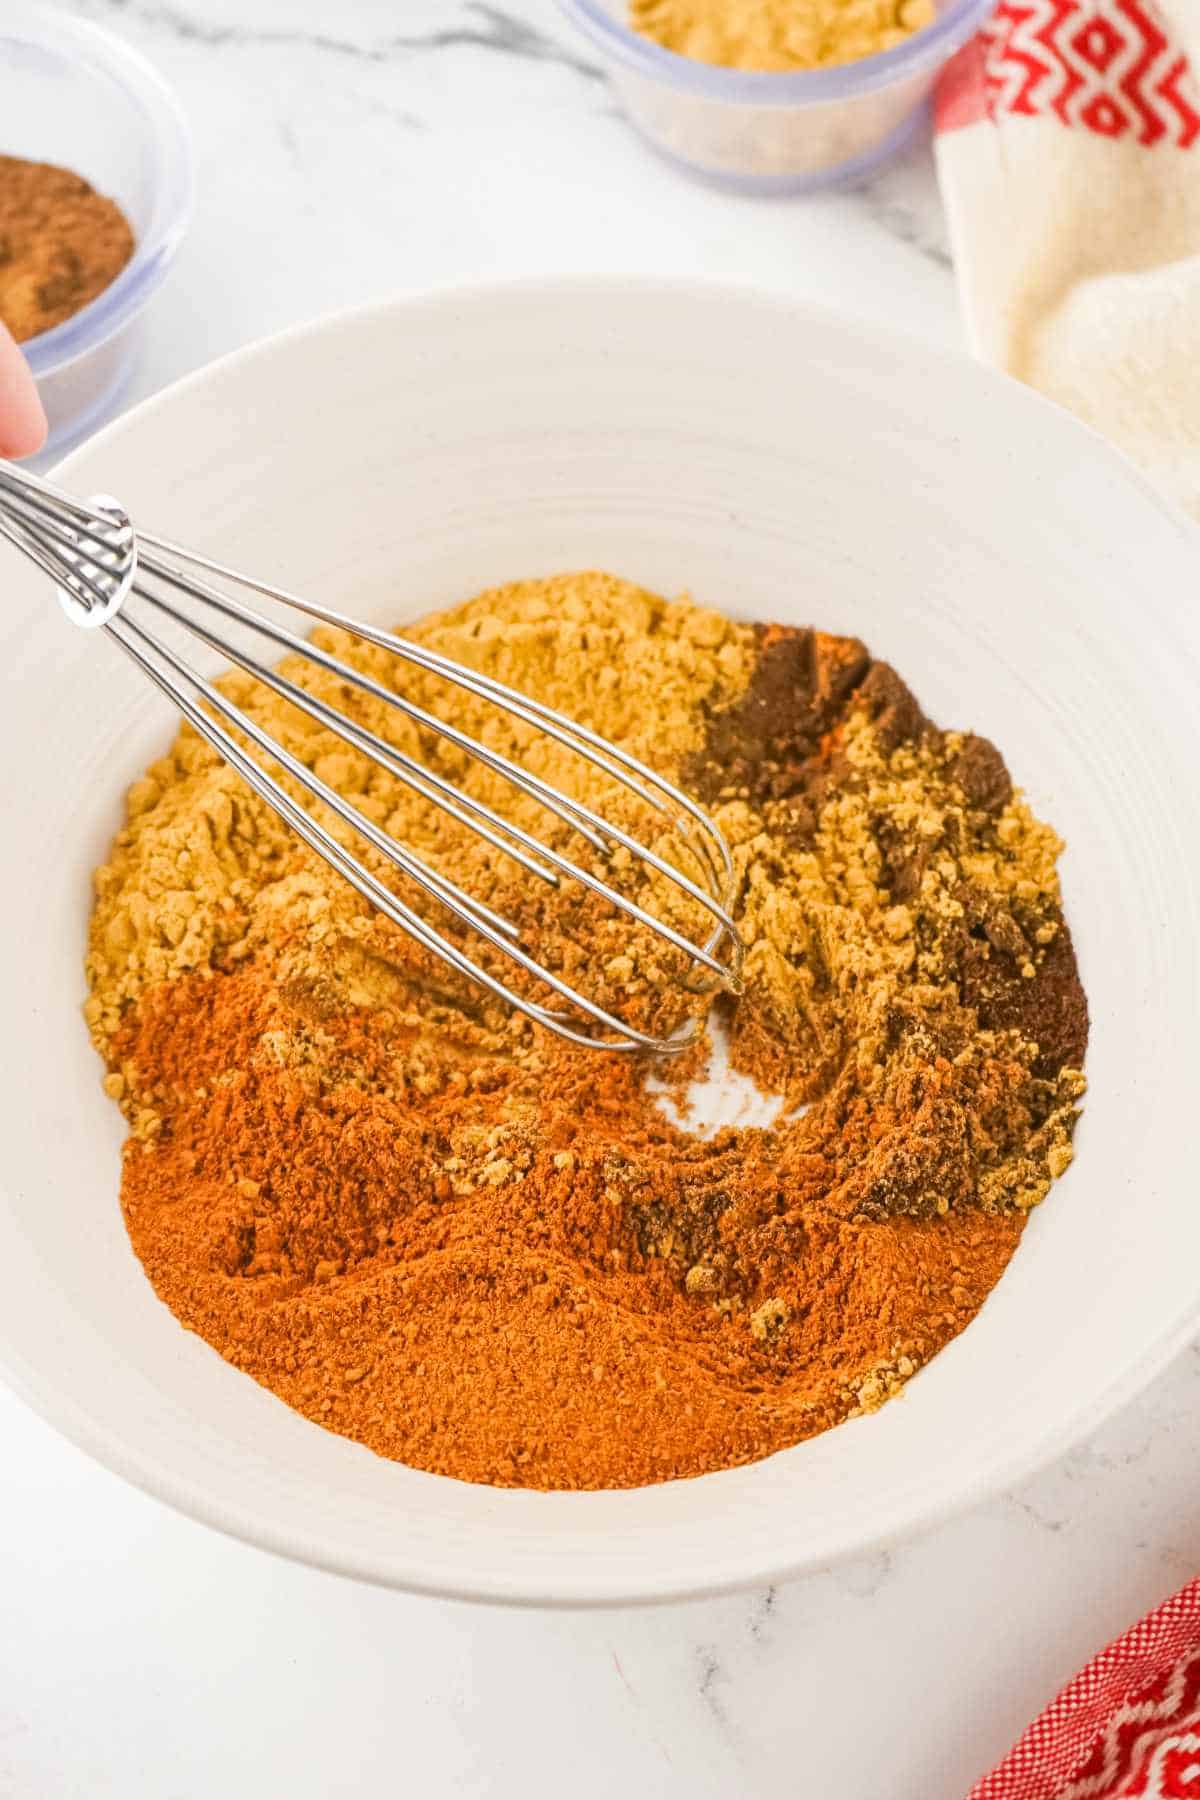 whisk blending spices in a bowl.